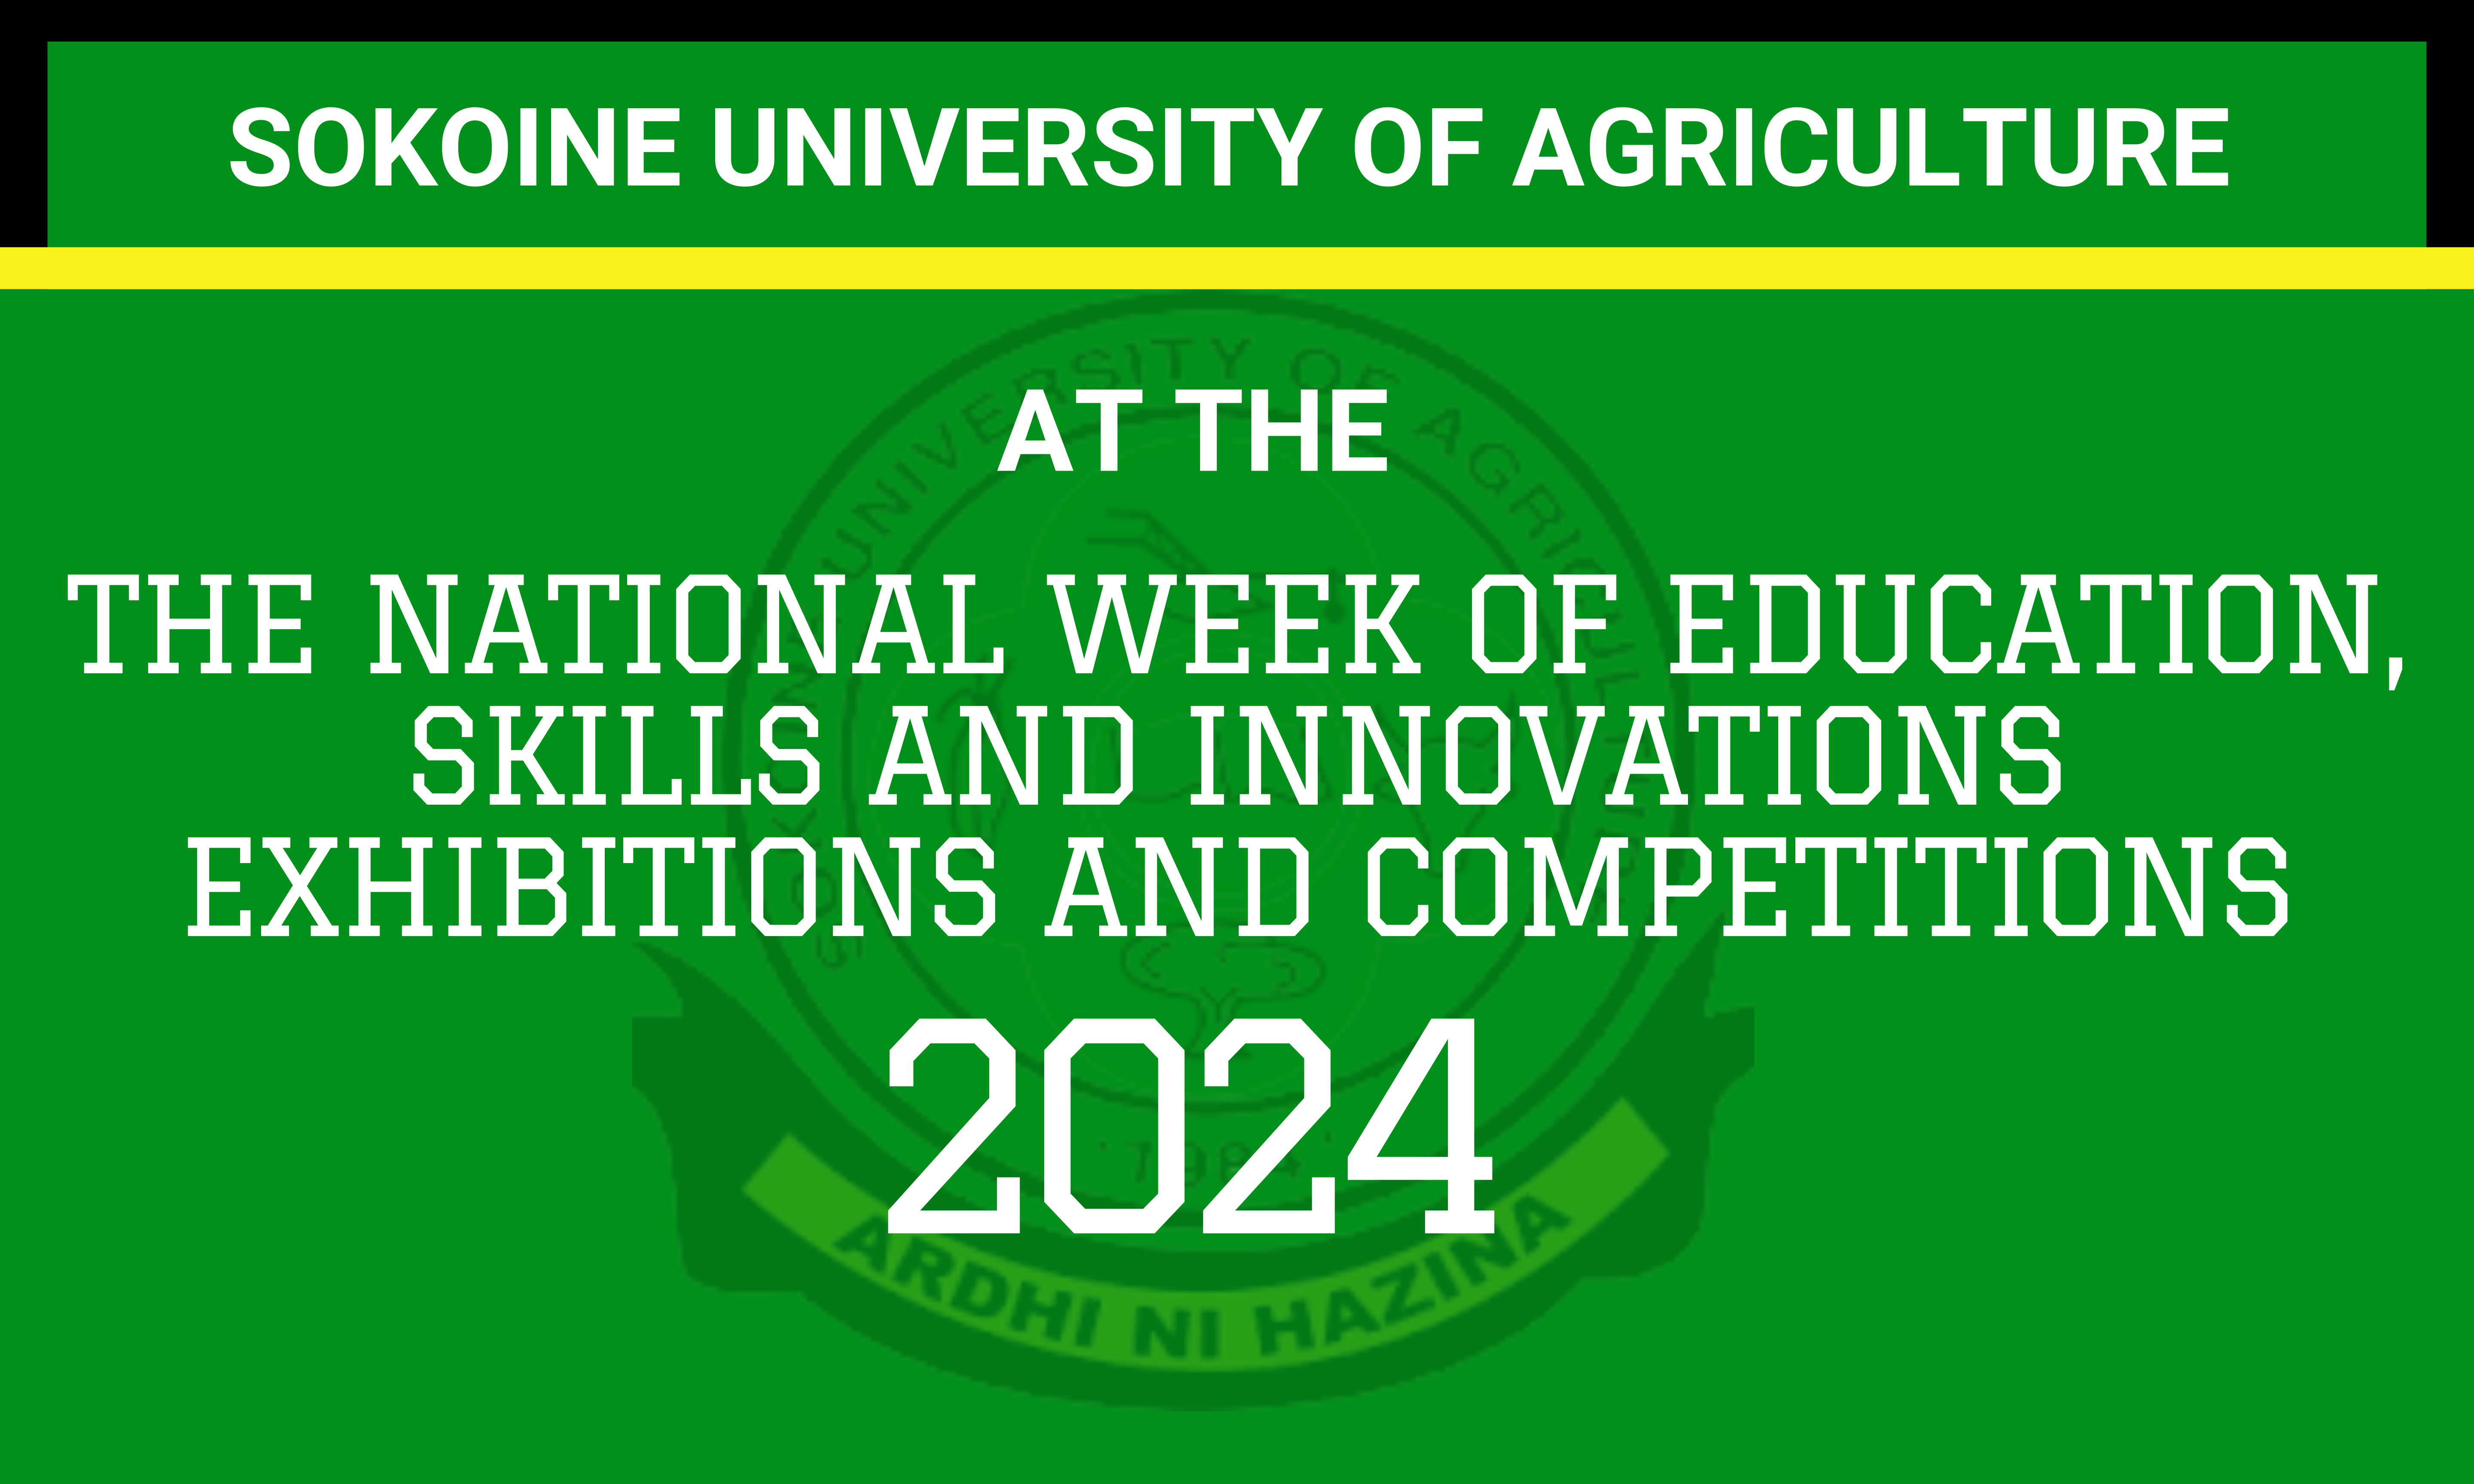 SUA AT THE NATIONAL WEEK OF EDUCATION, SKILLS AND INNOVATIONS EXHIBITIONS AND COMPETITIONS 2024